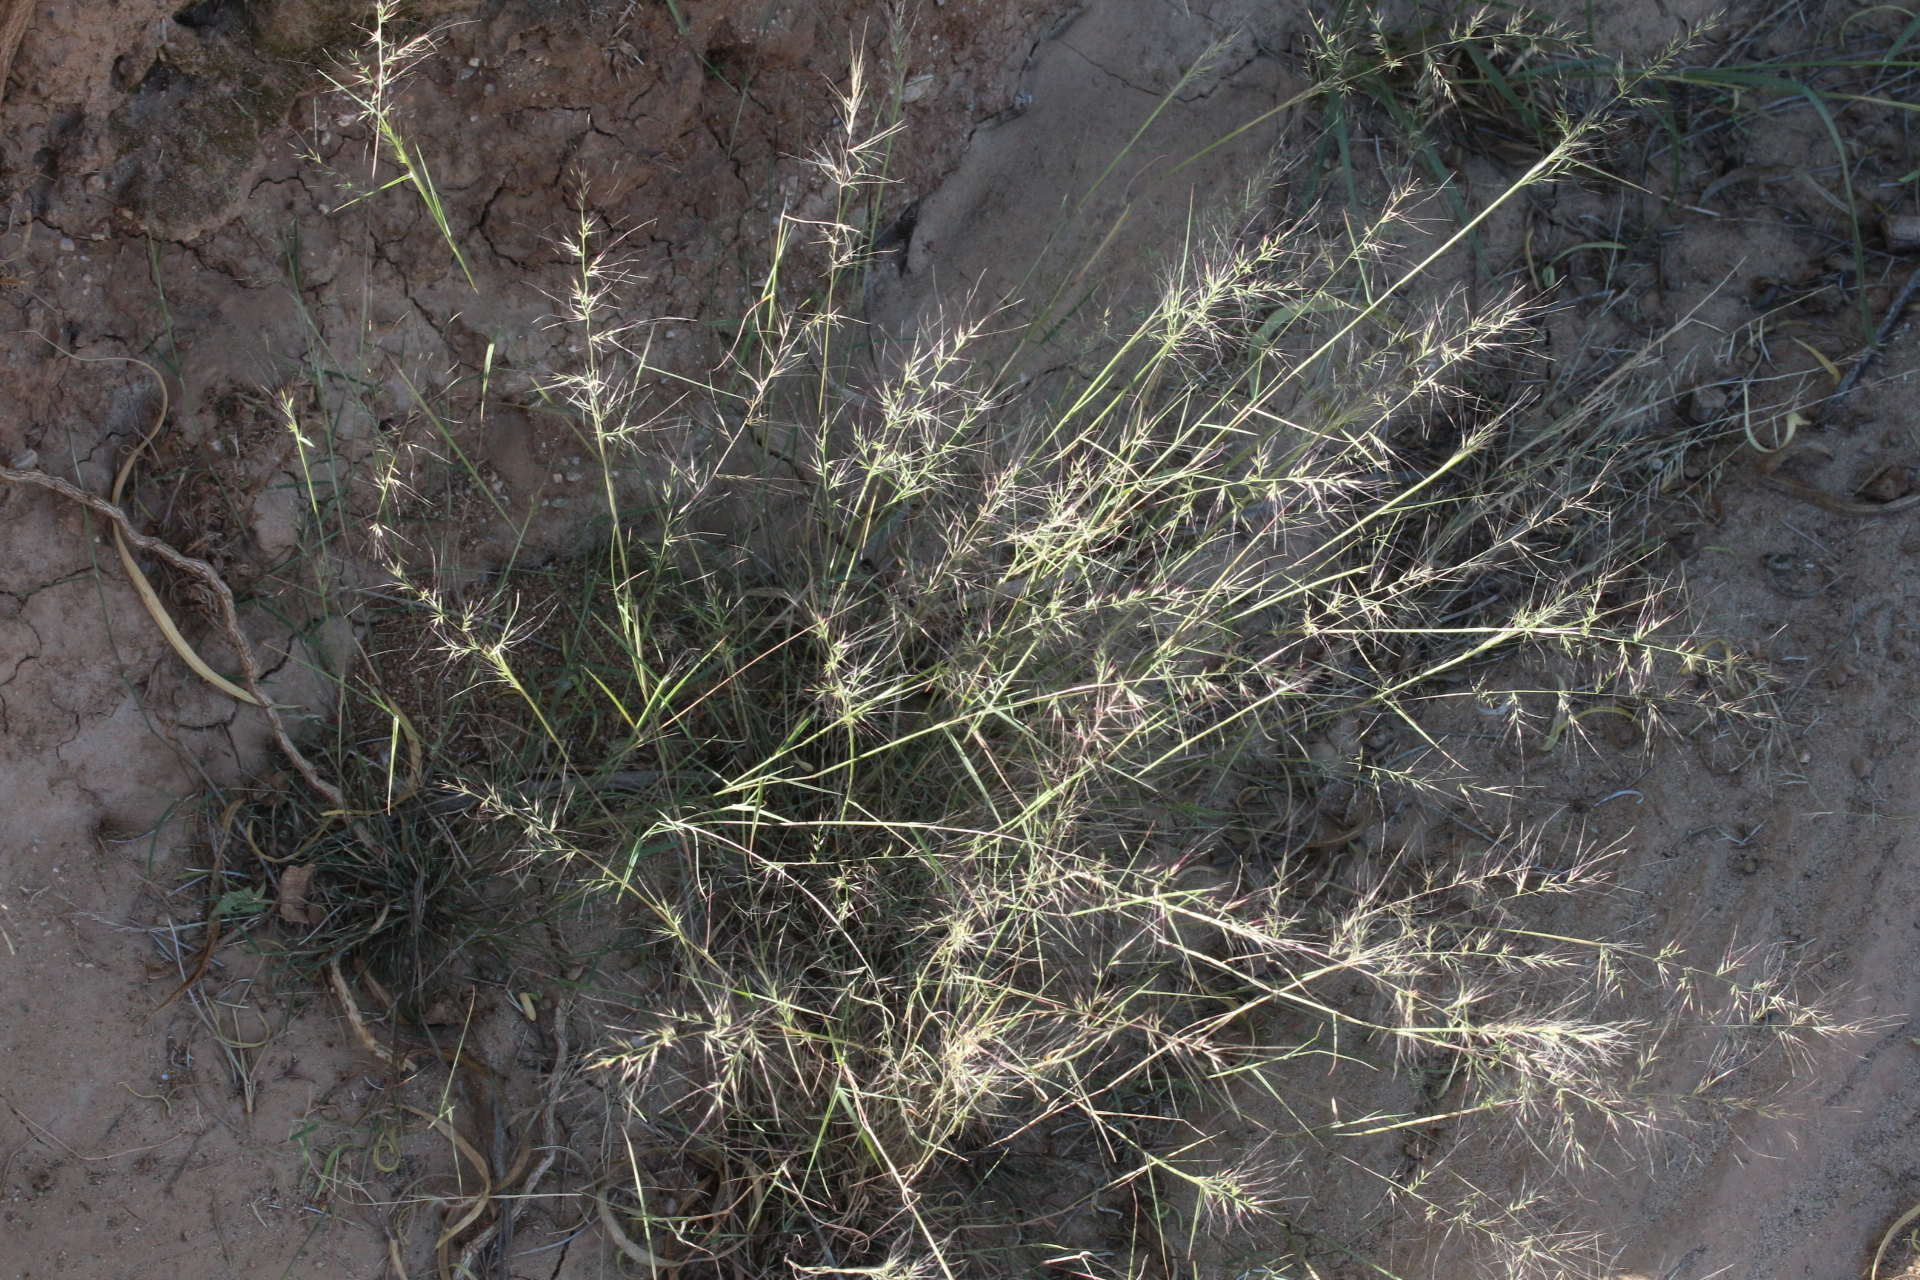 Image of littleseed muhly